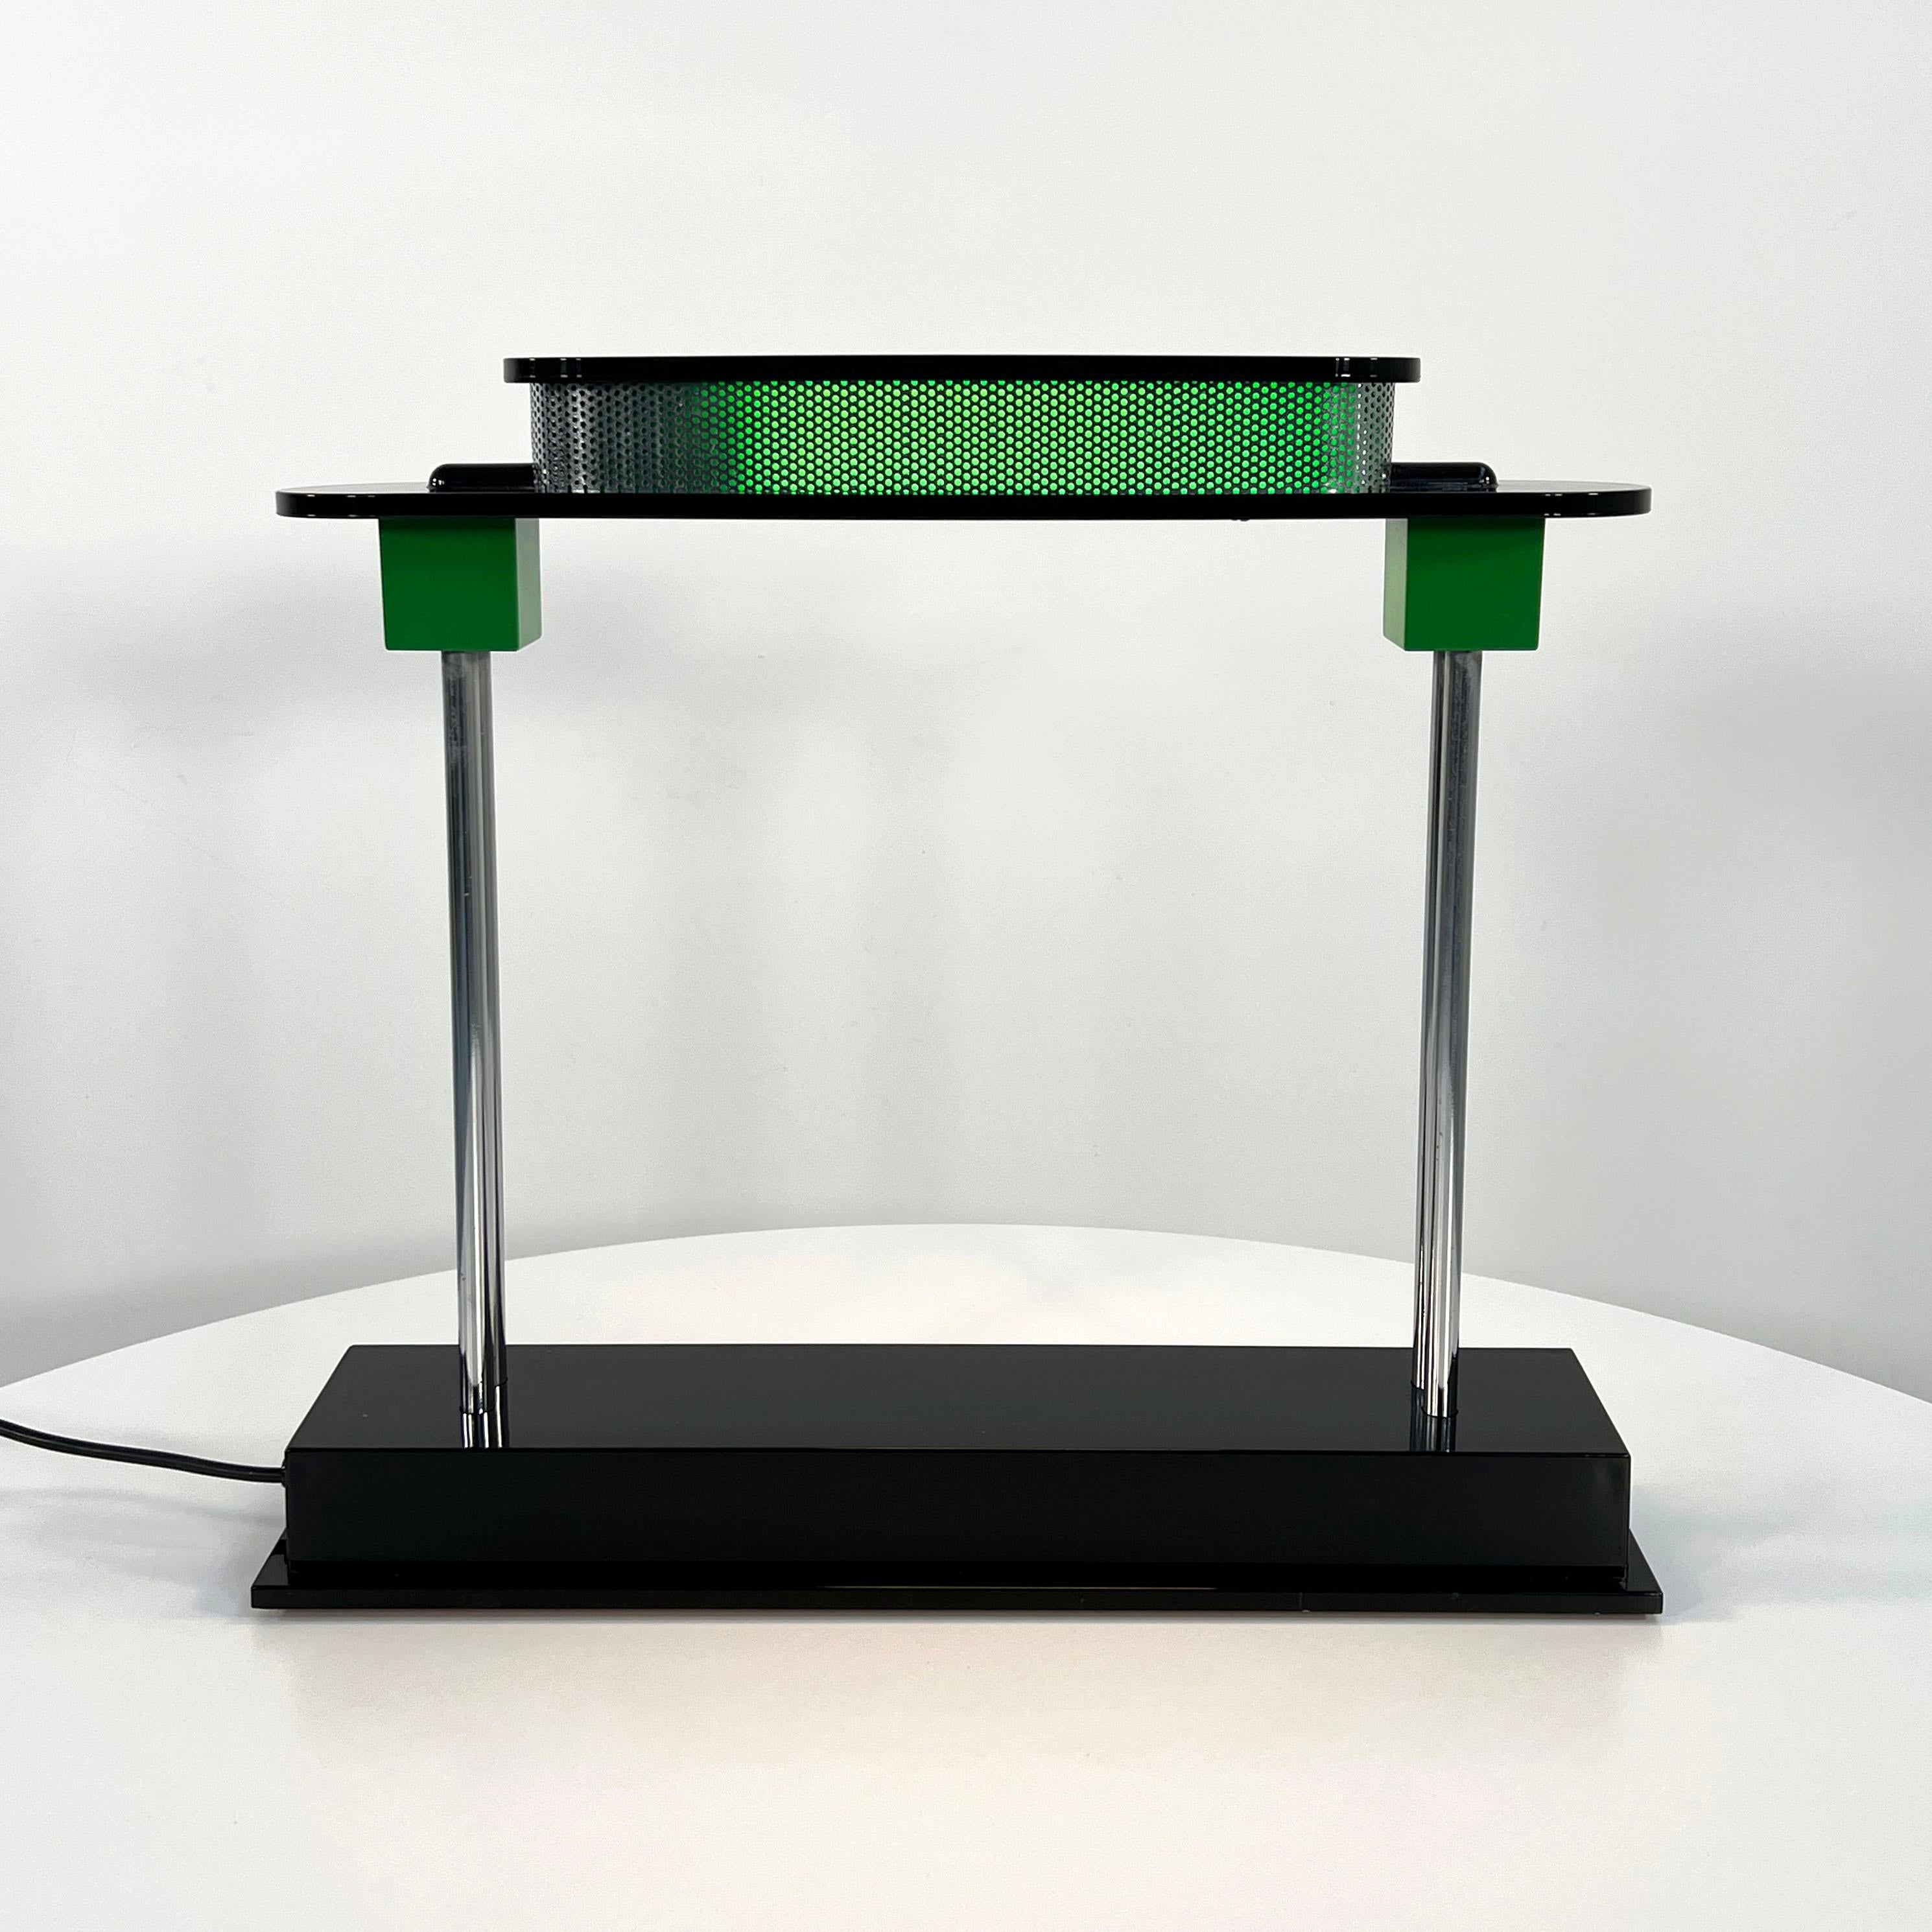 Pausania Table Lamp by Ettore Sottsass for Artemide, 1980s
Designer - Ettore Sottsass
Producer - Artemide
Model - Pausania Table Lamp
Design Period - Eighties
Measurements - Width 48 cm x Depth 11 cm x Height 43 cm
Materials - Metal, Plastic
Color -